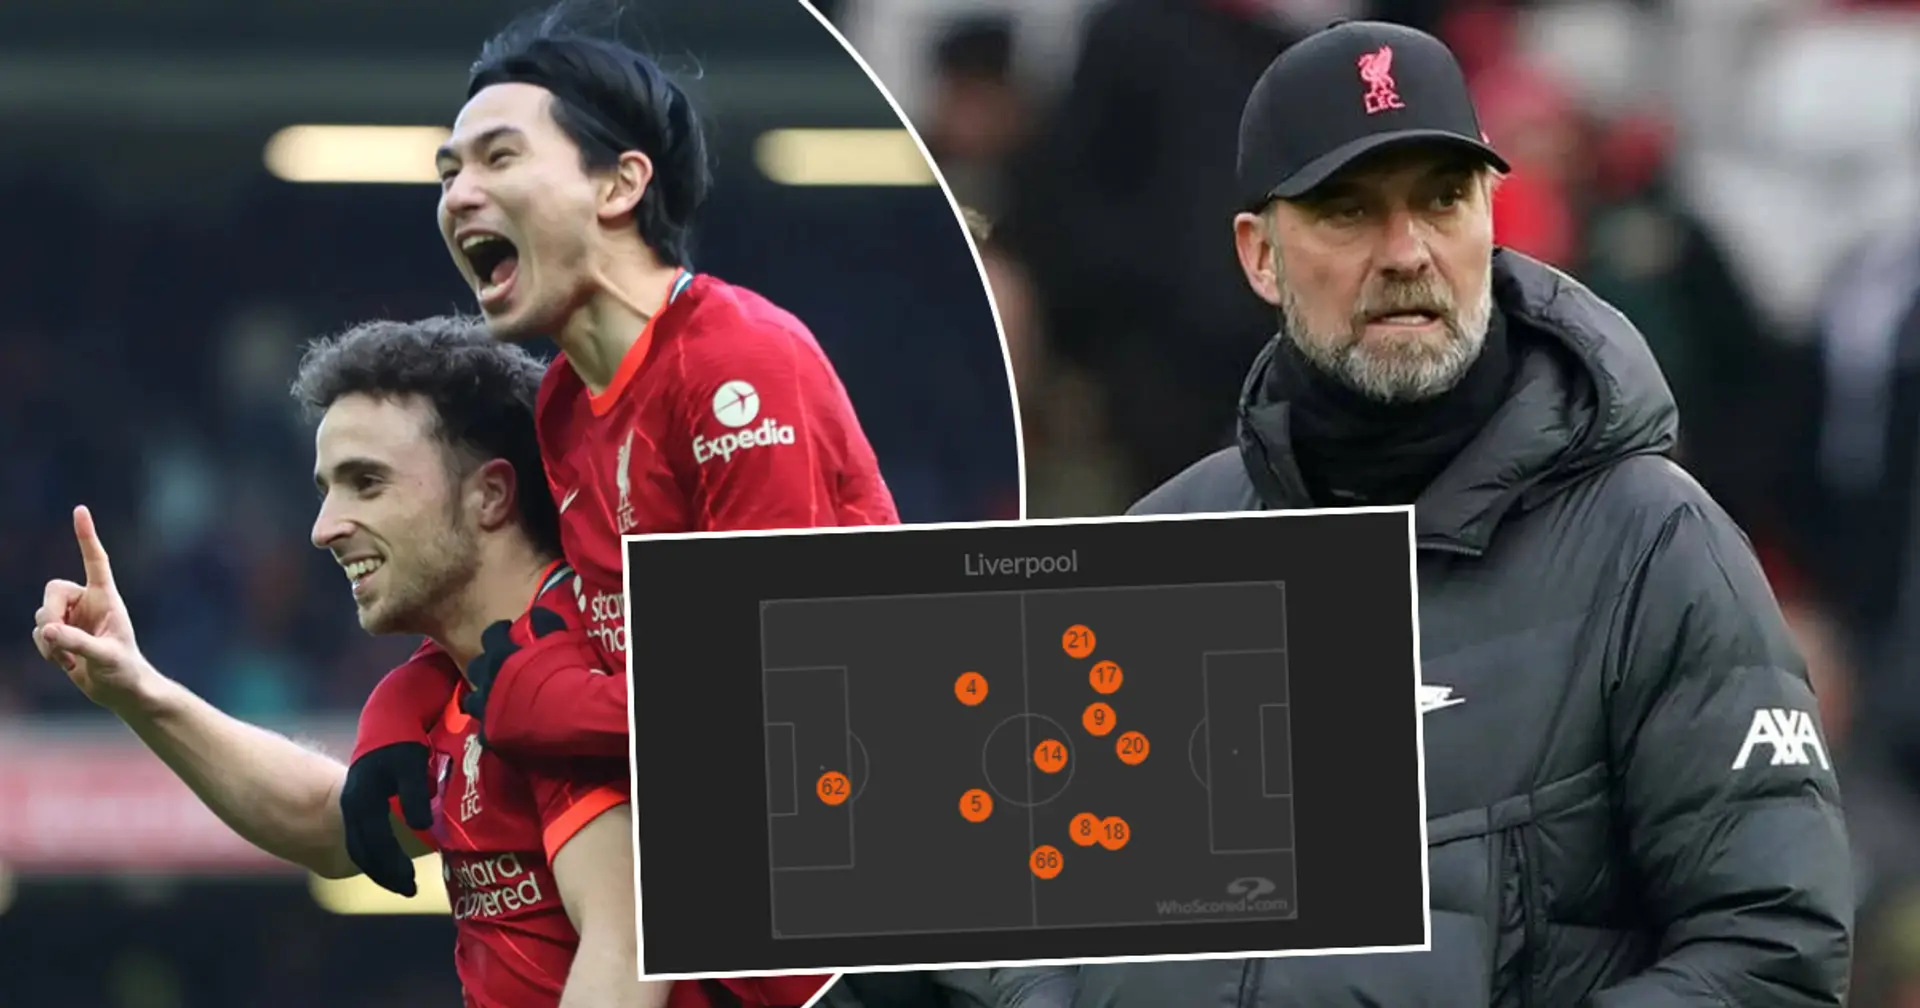 Rating Liverpool's performance vs Cardiff City based on 3 key factors